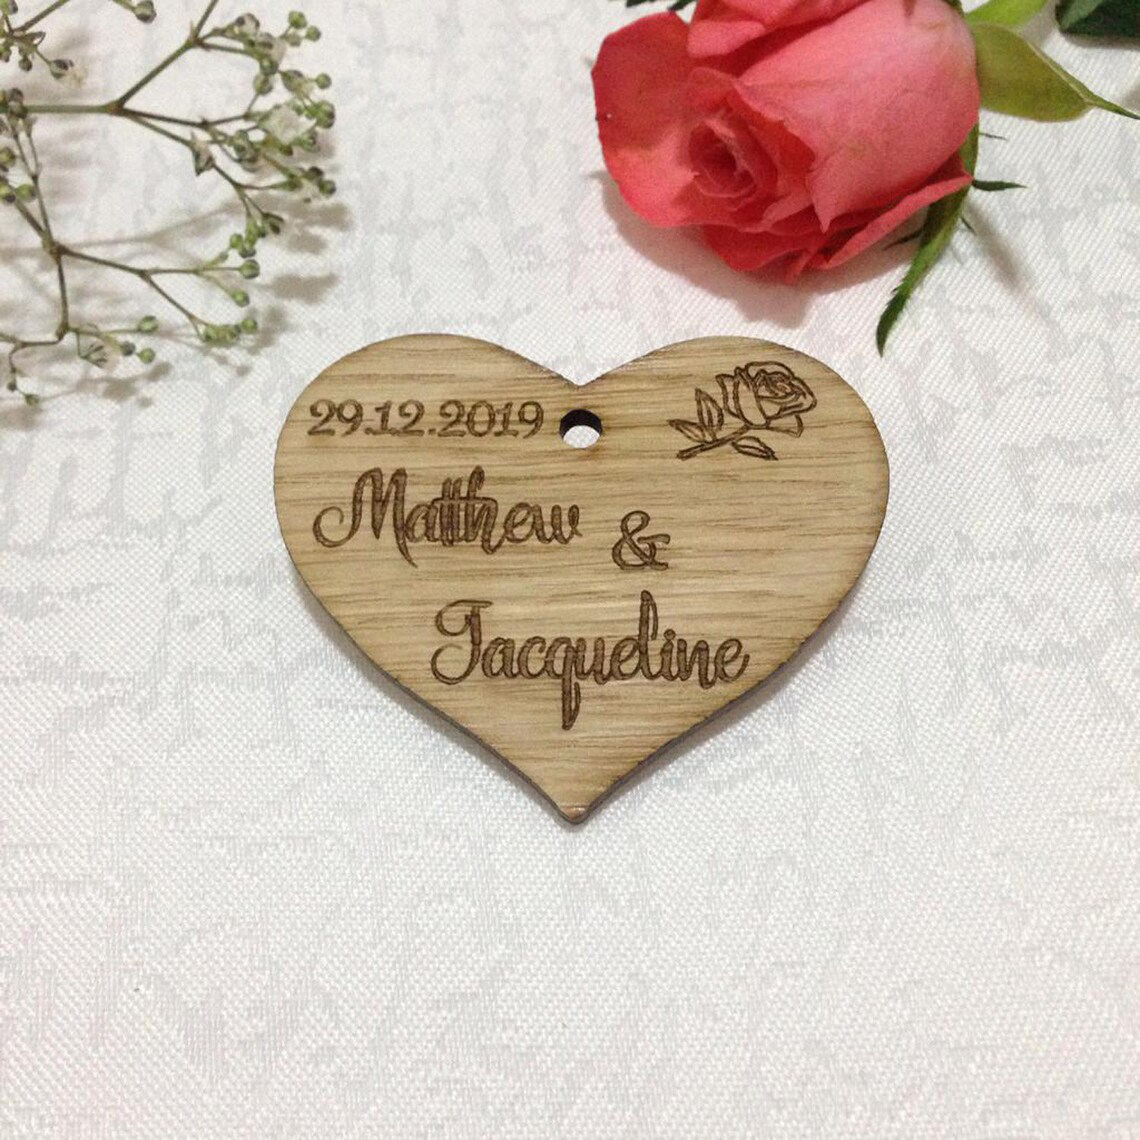 Rustic Wooden Heart Save the Date Magnet - Rose